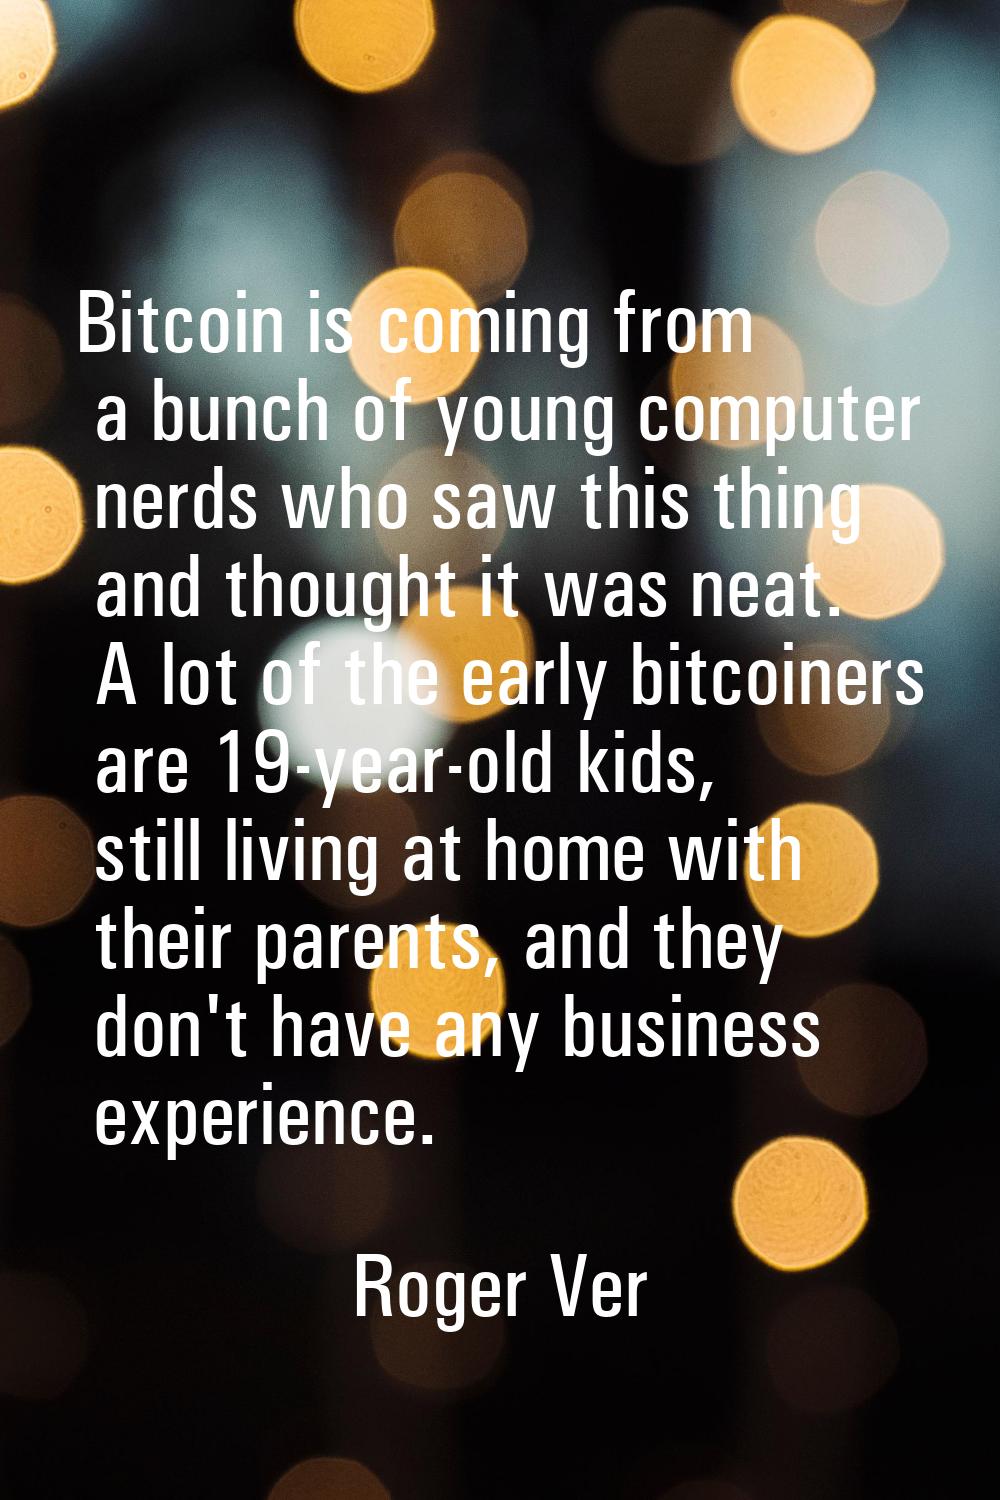 Bitcoin is coming from a bunch of young computer nerds who saw this thing and thought it was neat. 